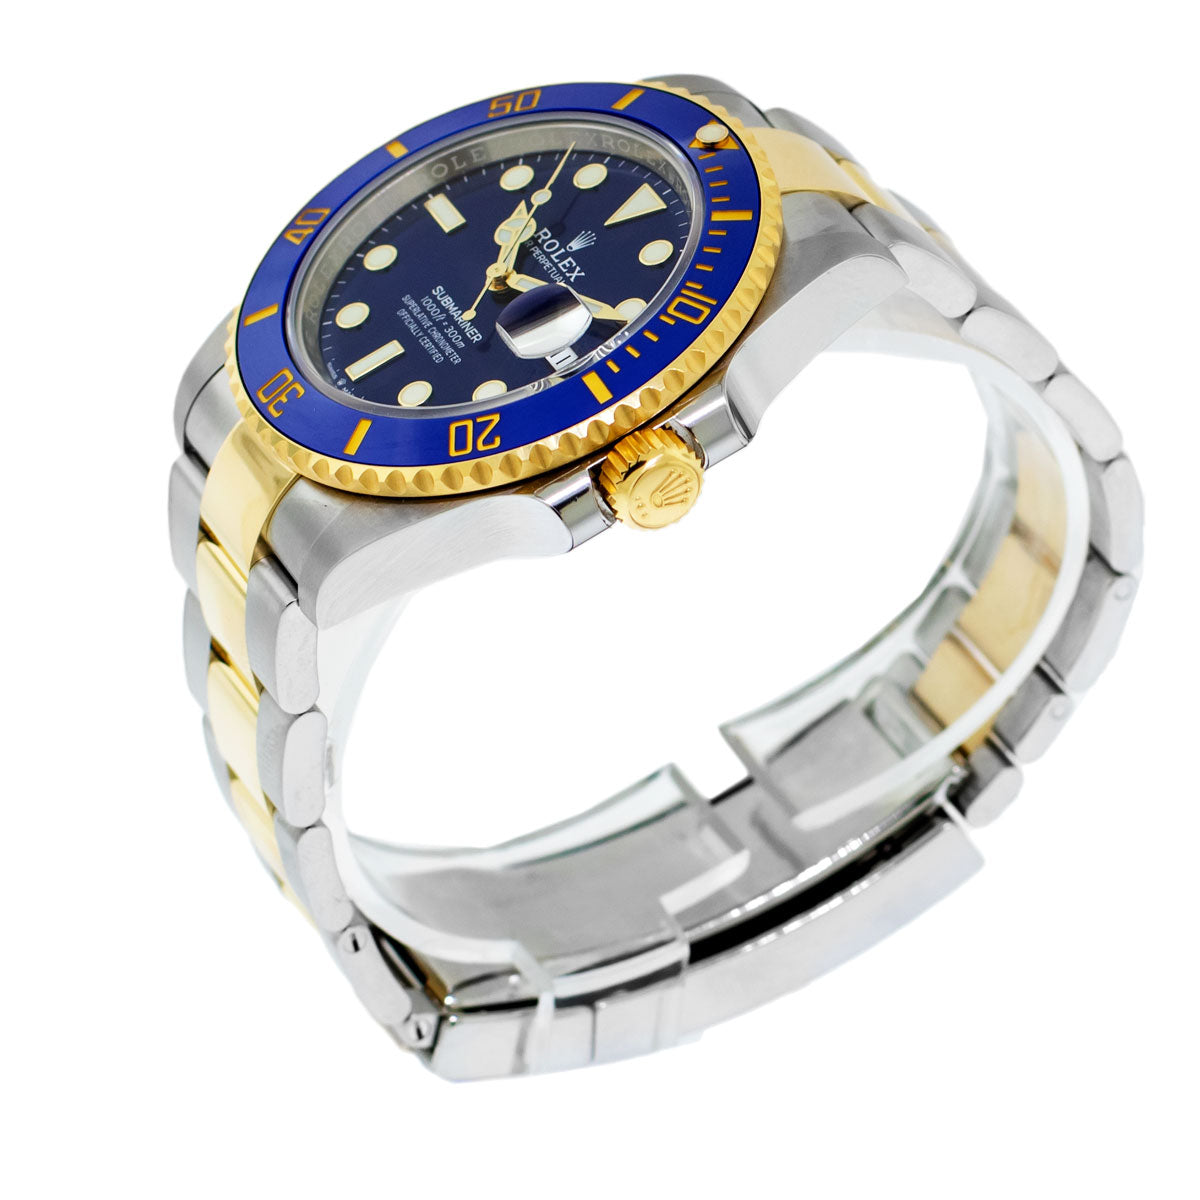 Rolex Oyster Perpetual Submariner Steel & Gold 126613LB